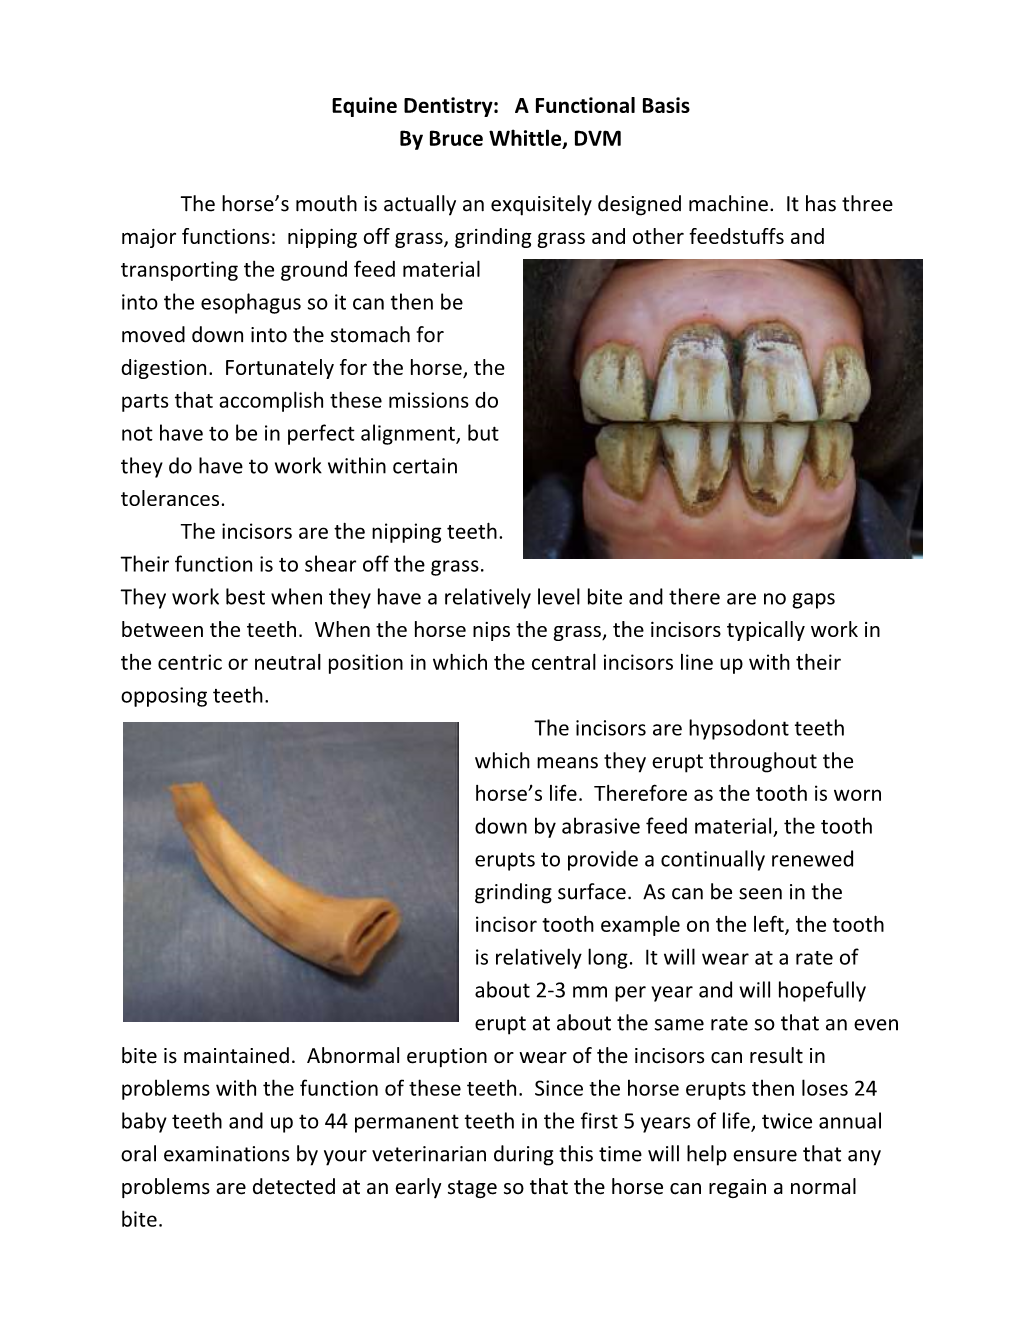 Equine Dentistry: a Functional Basis by Bruce Whittle, DVM the Horse's